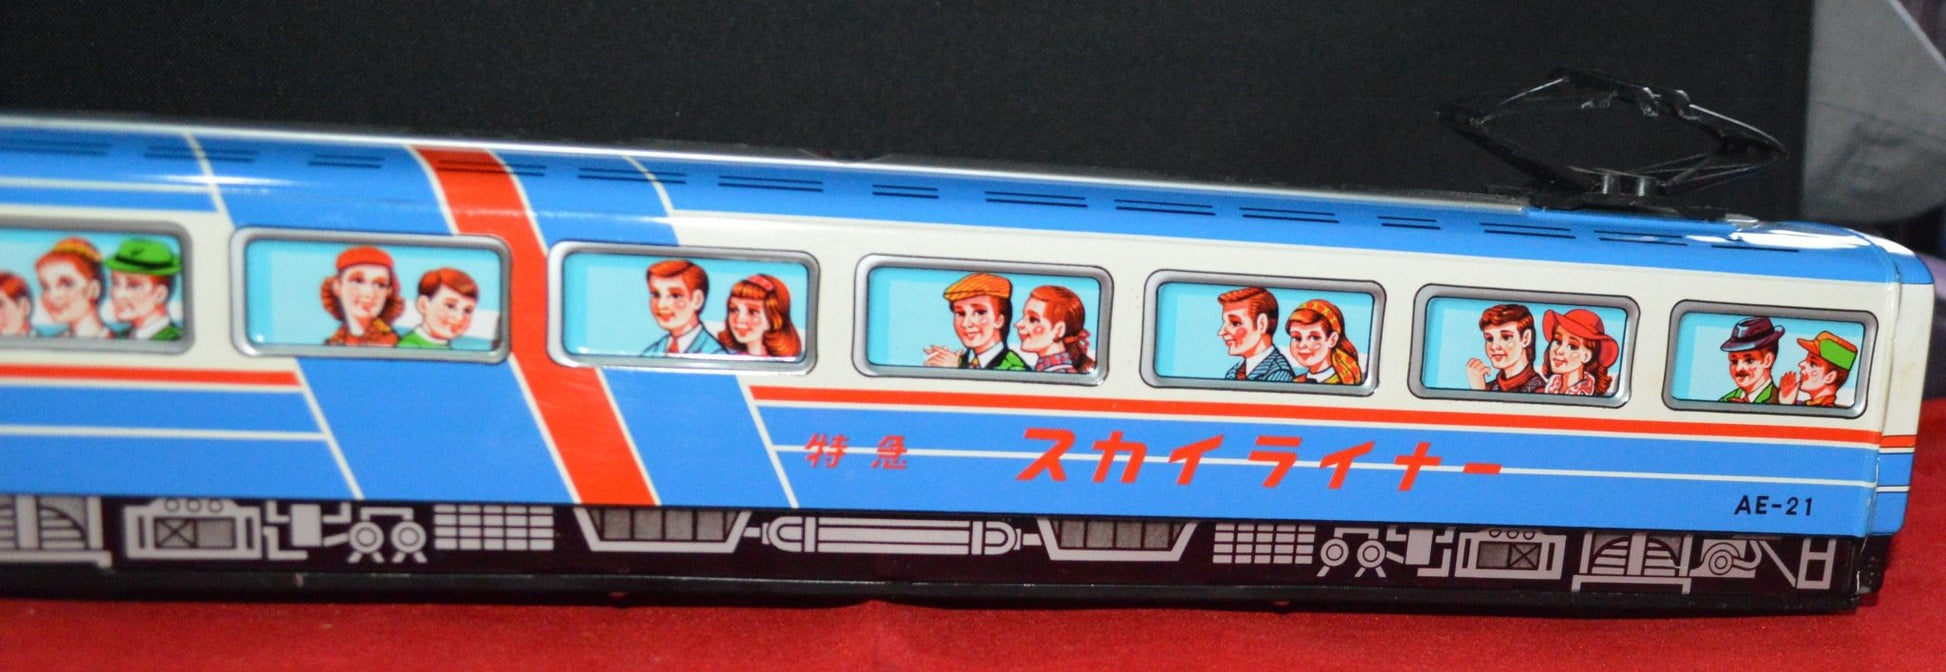 ICHIKO FRICTIO POWERED TINPLATE PASSENGER TRAIN AE-21 BOXED(PREVIOUSLY OWNED) GOOD CONDITION - TMD167207